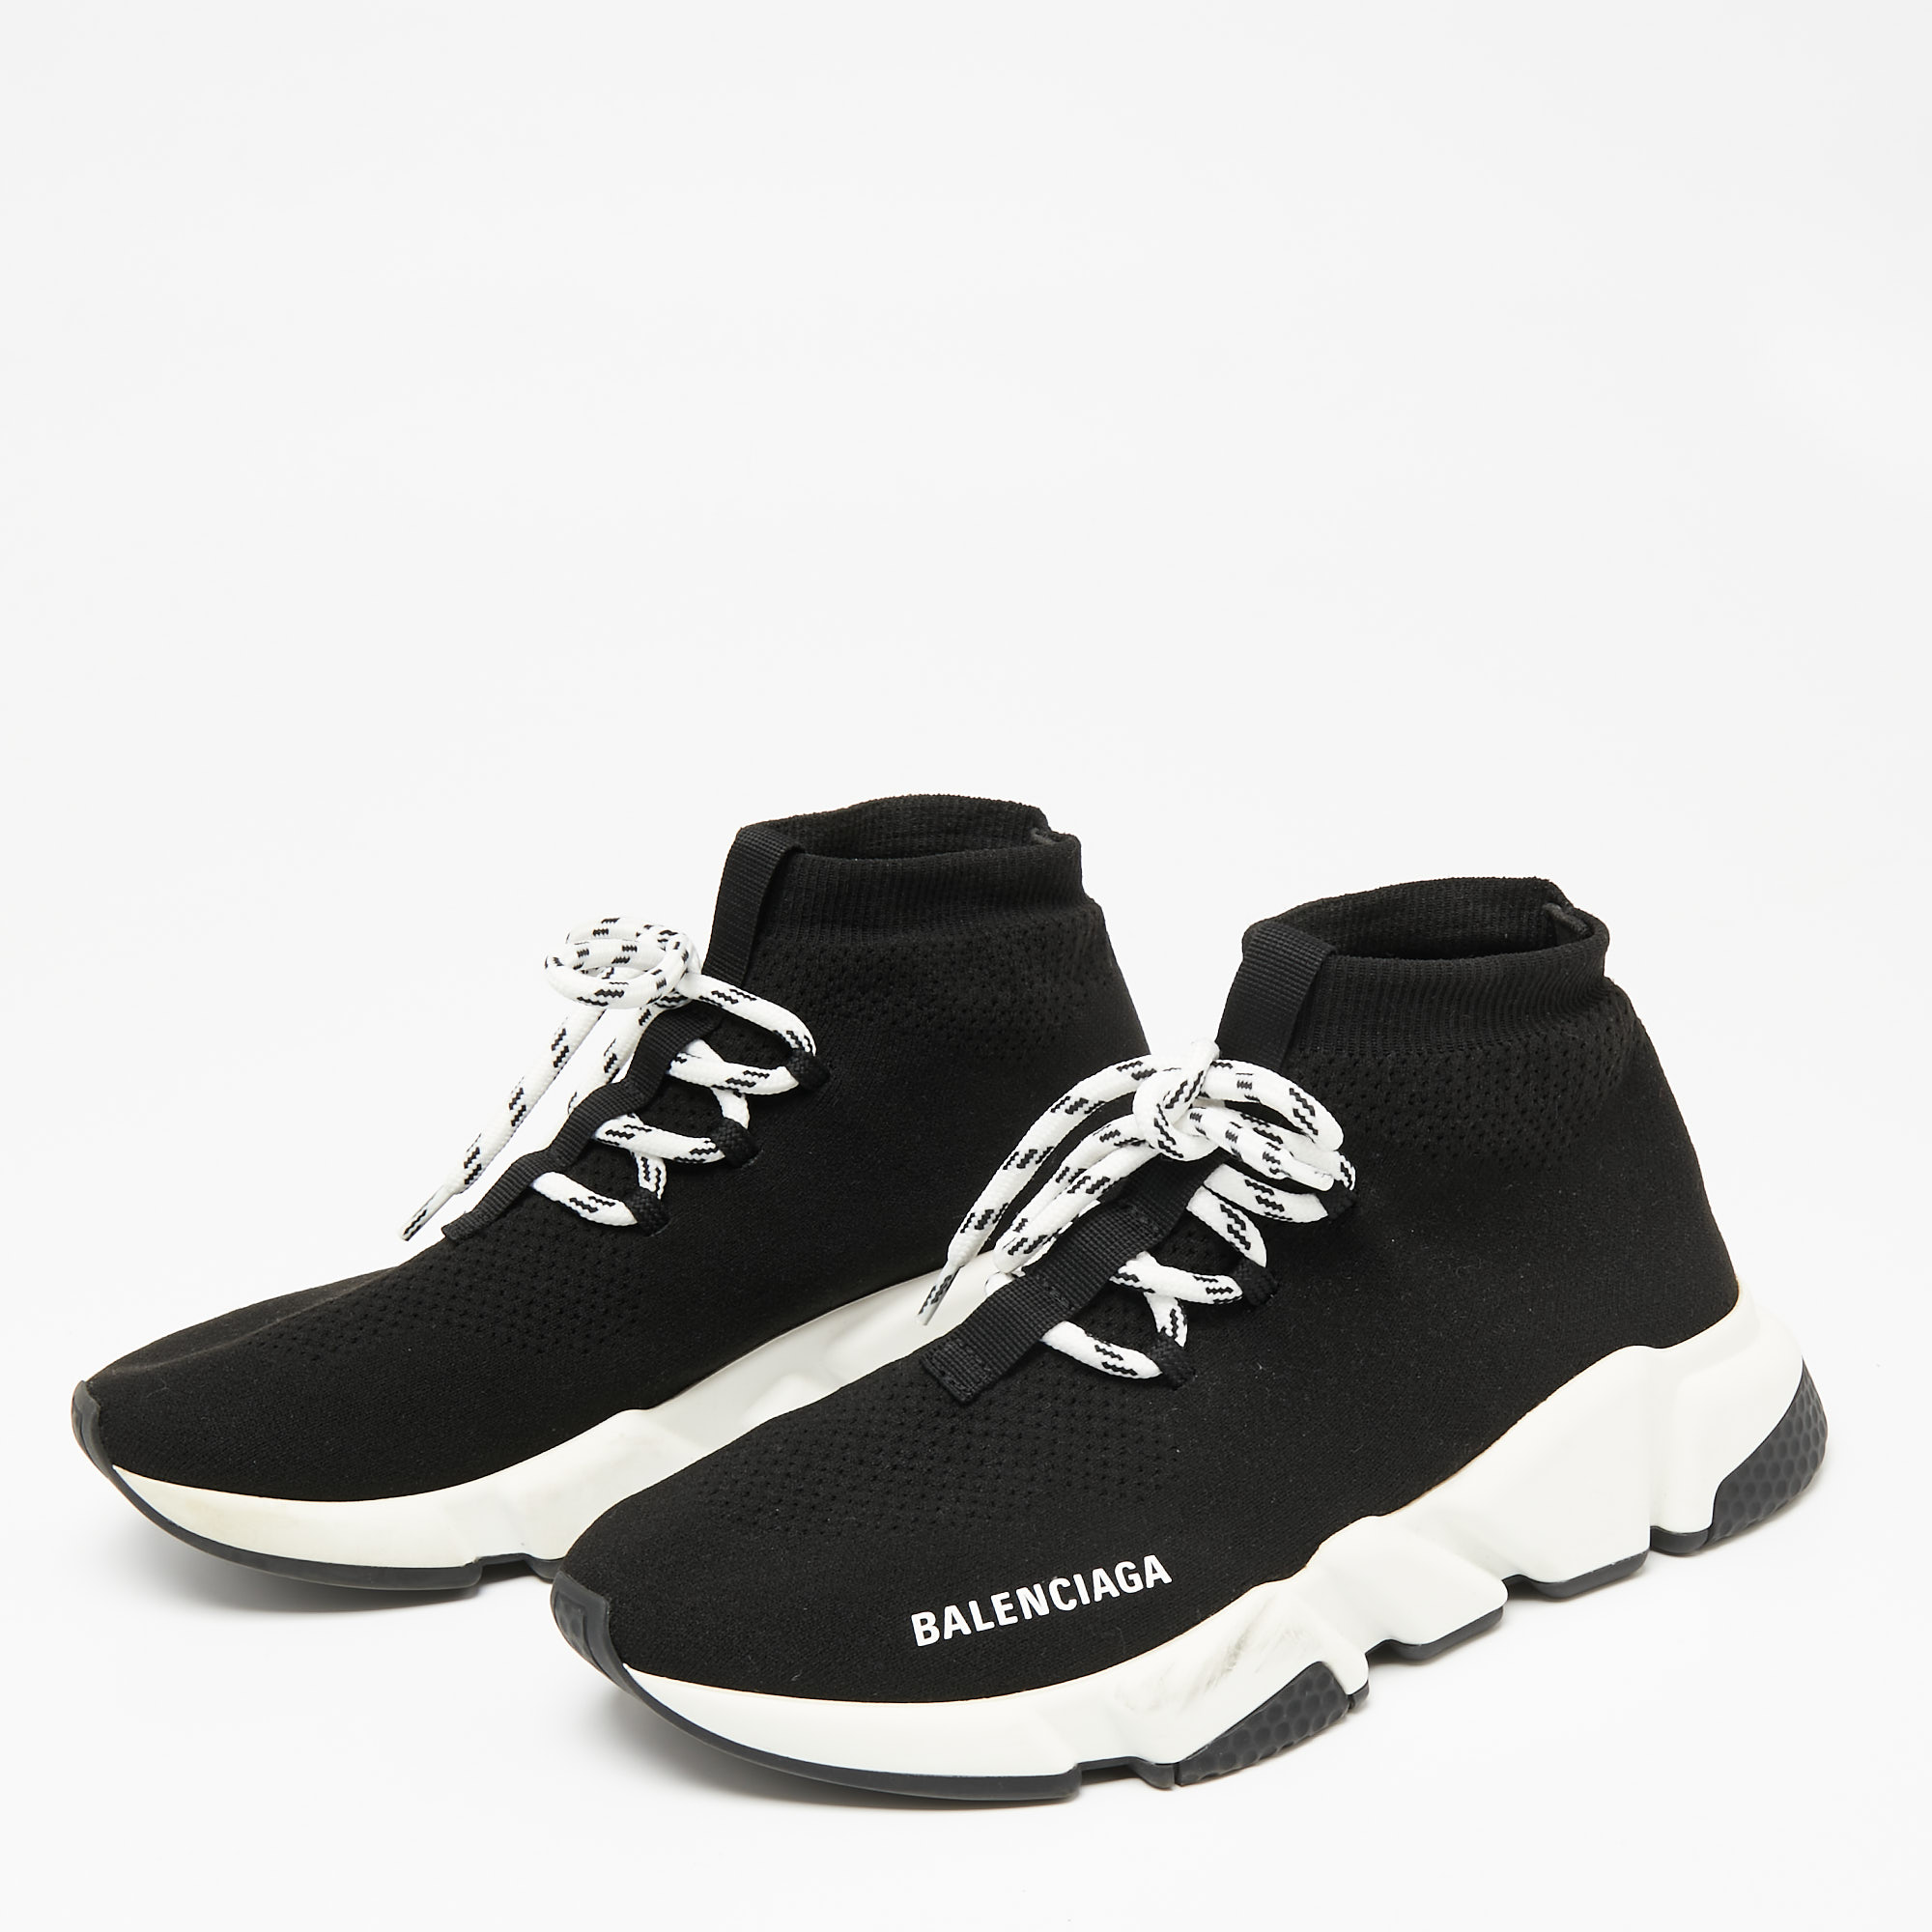 

Balenciaga Black Knit Fabric Speed Trainer Lace Up Sock Sneakers Size